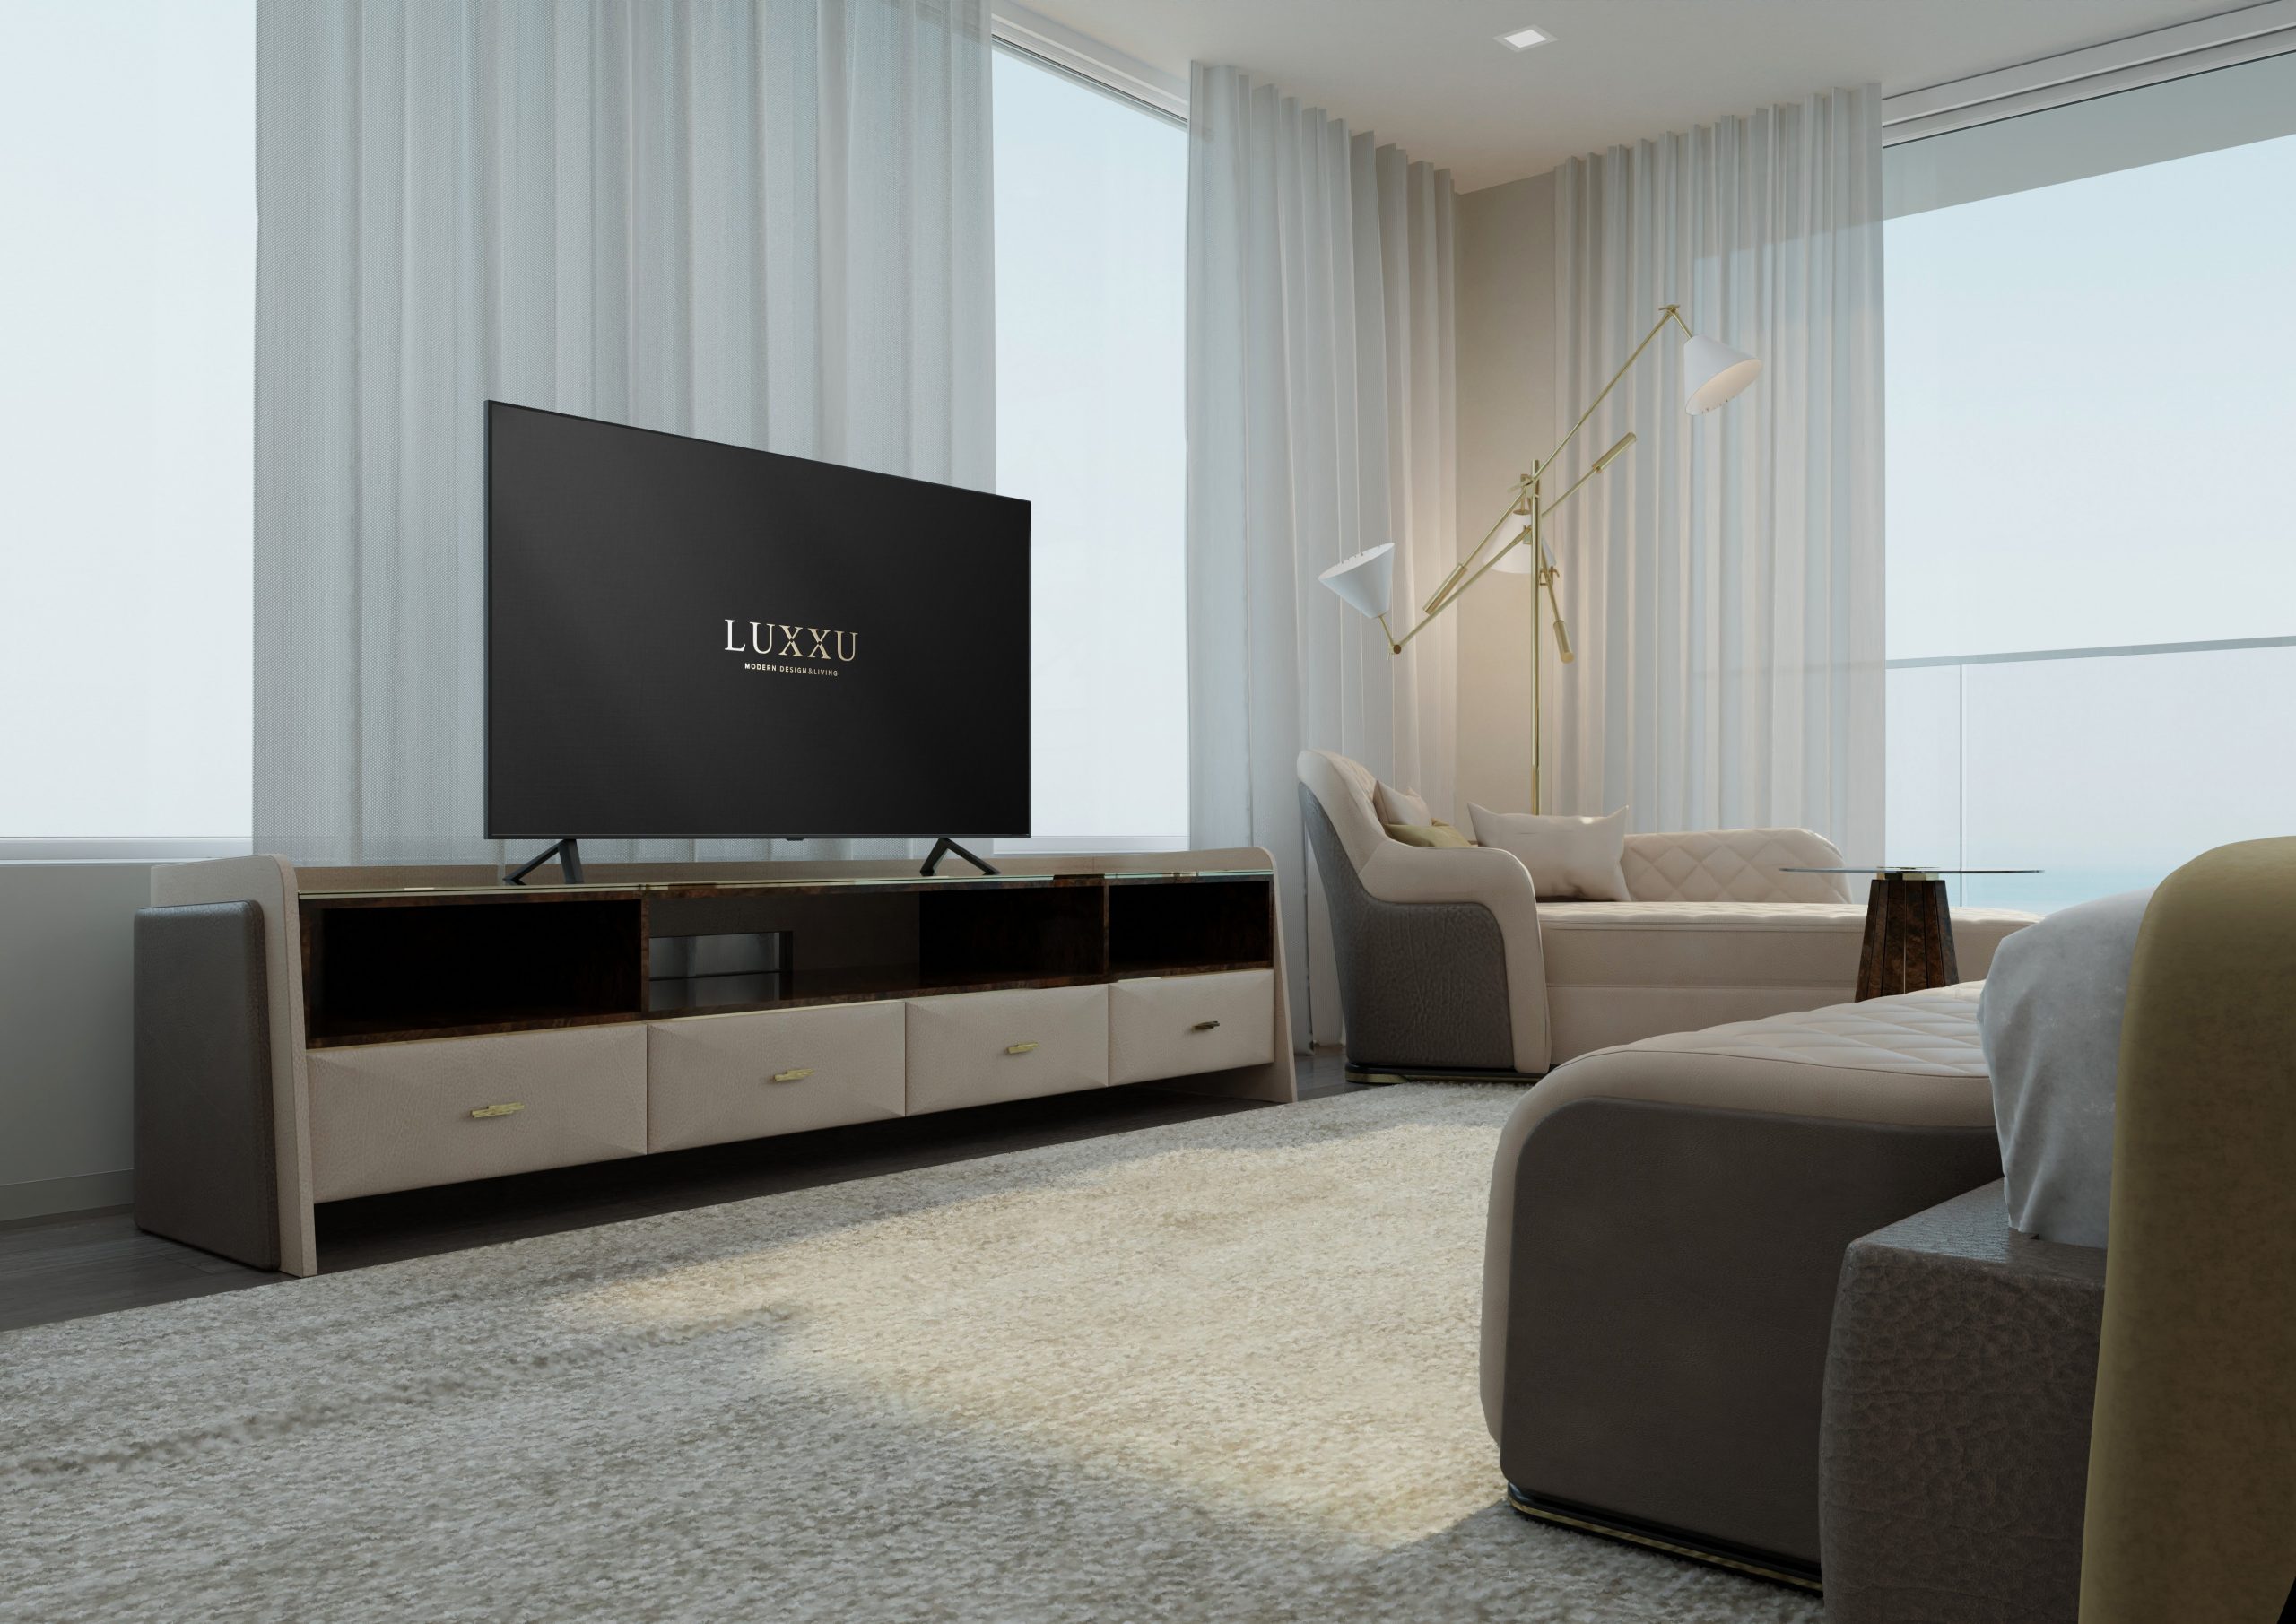 HERITAGE PENTHOUSE IN LIVERPOOL BY LUXXU: A PROJECT FT. PULLCAST See the elegant Skyline Drawer Handles complementing the refined Charla TV Cabinet